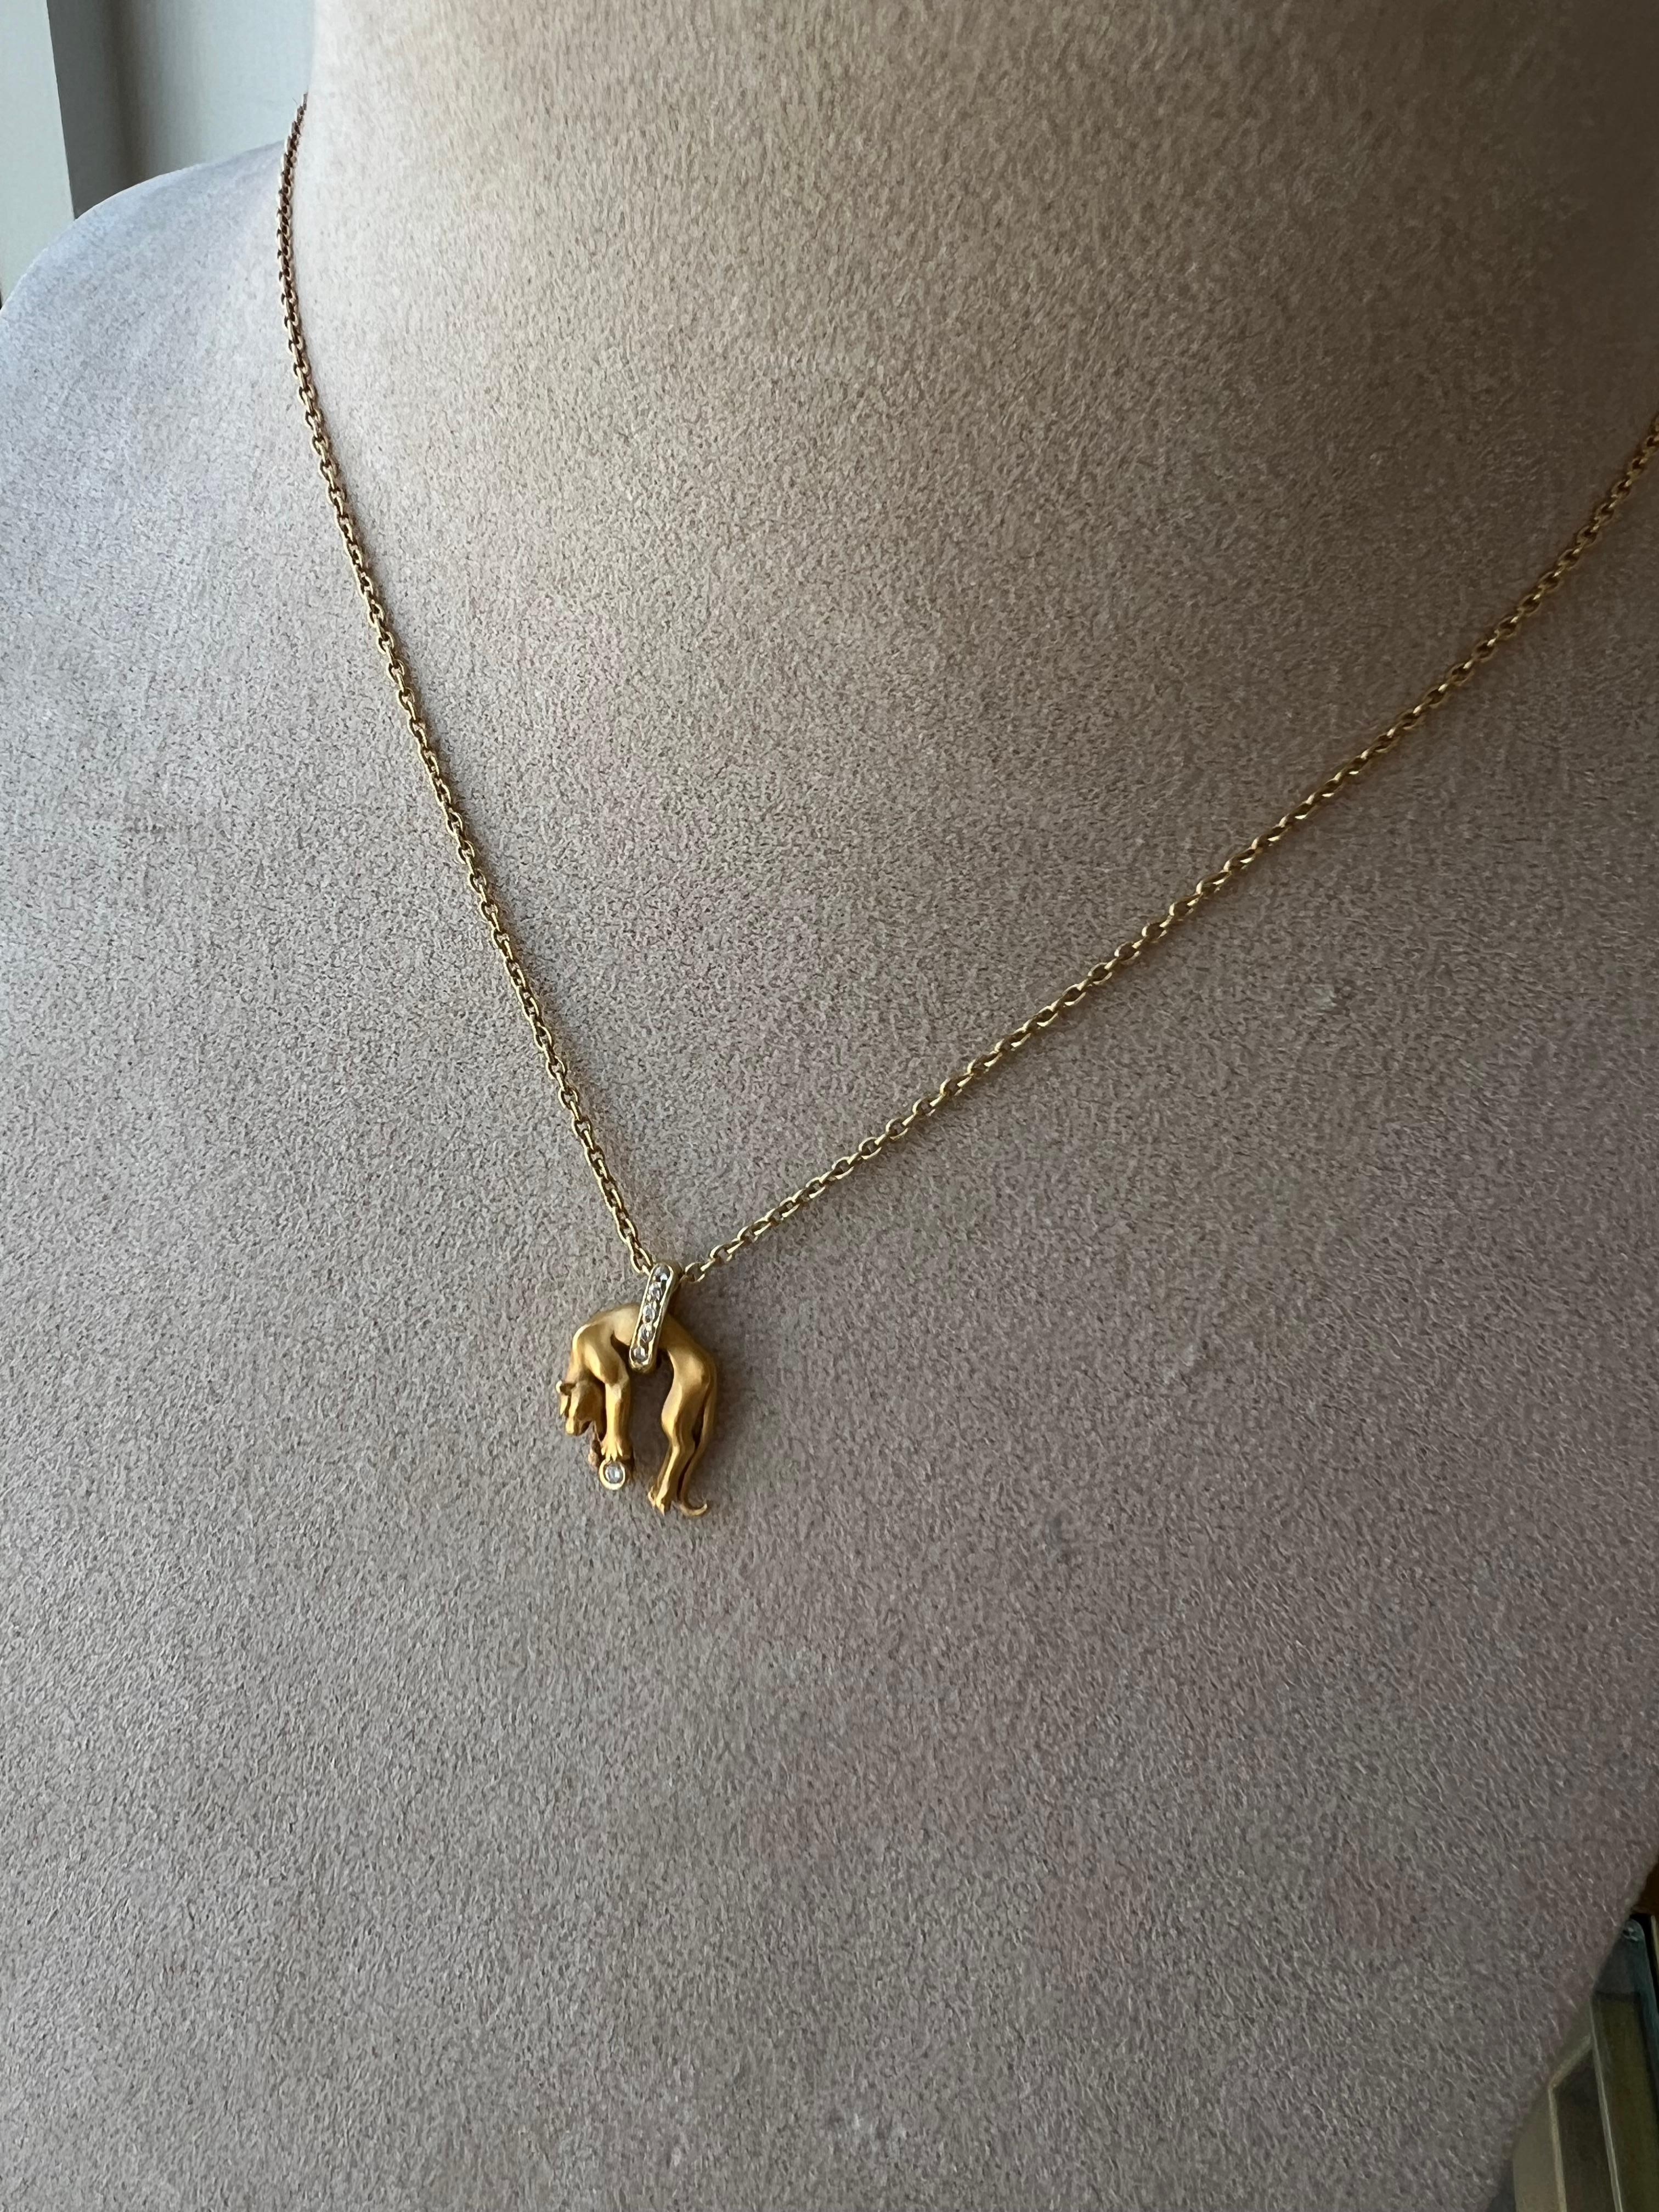 Women's or Men's Vintage 18K Yellow Gold Carrera y Carrera Panther Pendant with Diamonds. 